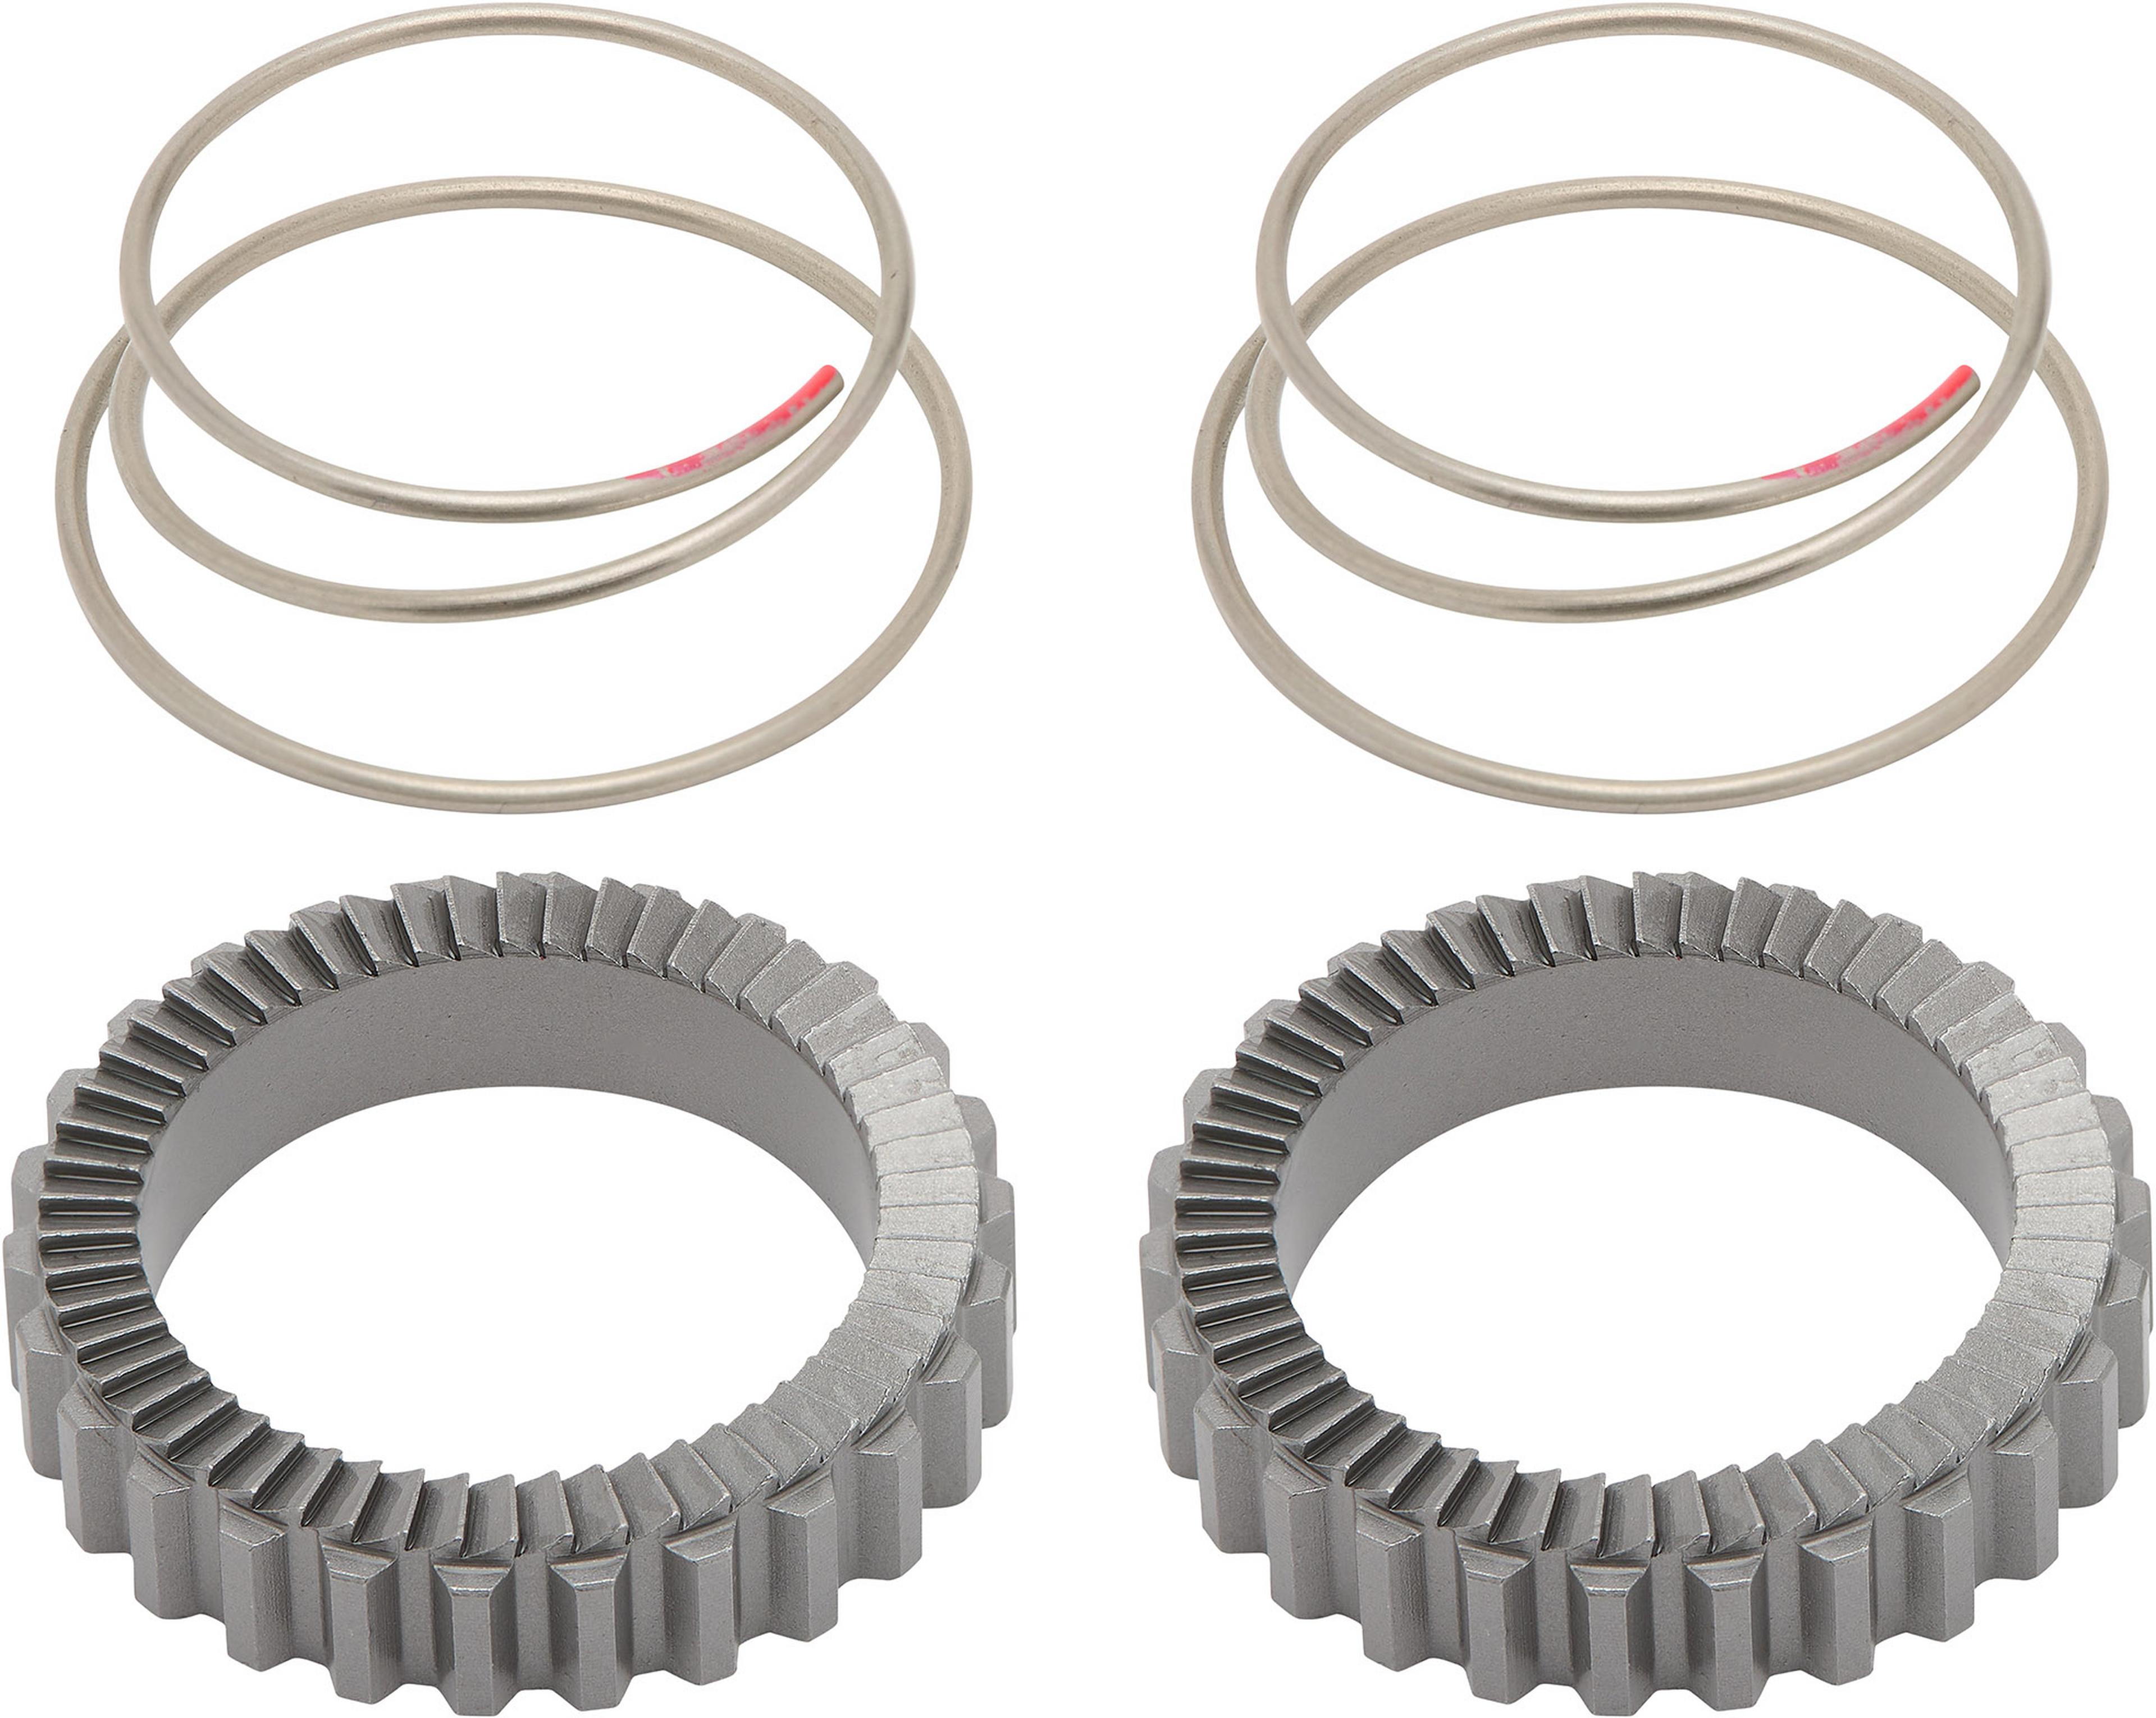 Nukeproof 54t Replacement Ratchet Rings and Springs